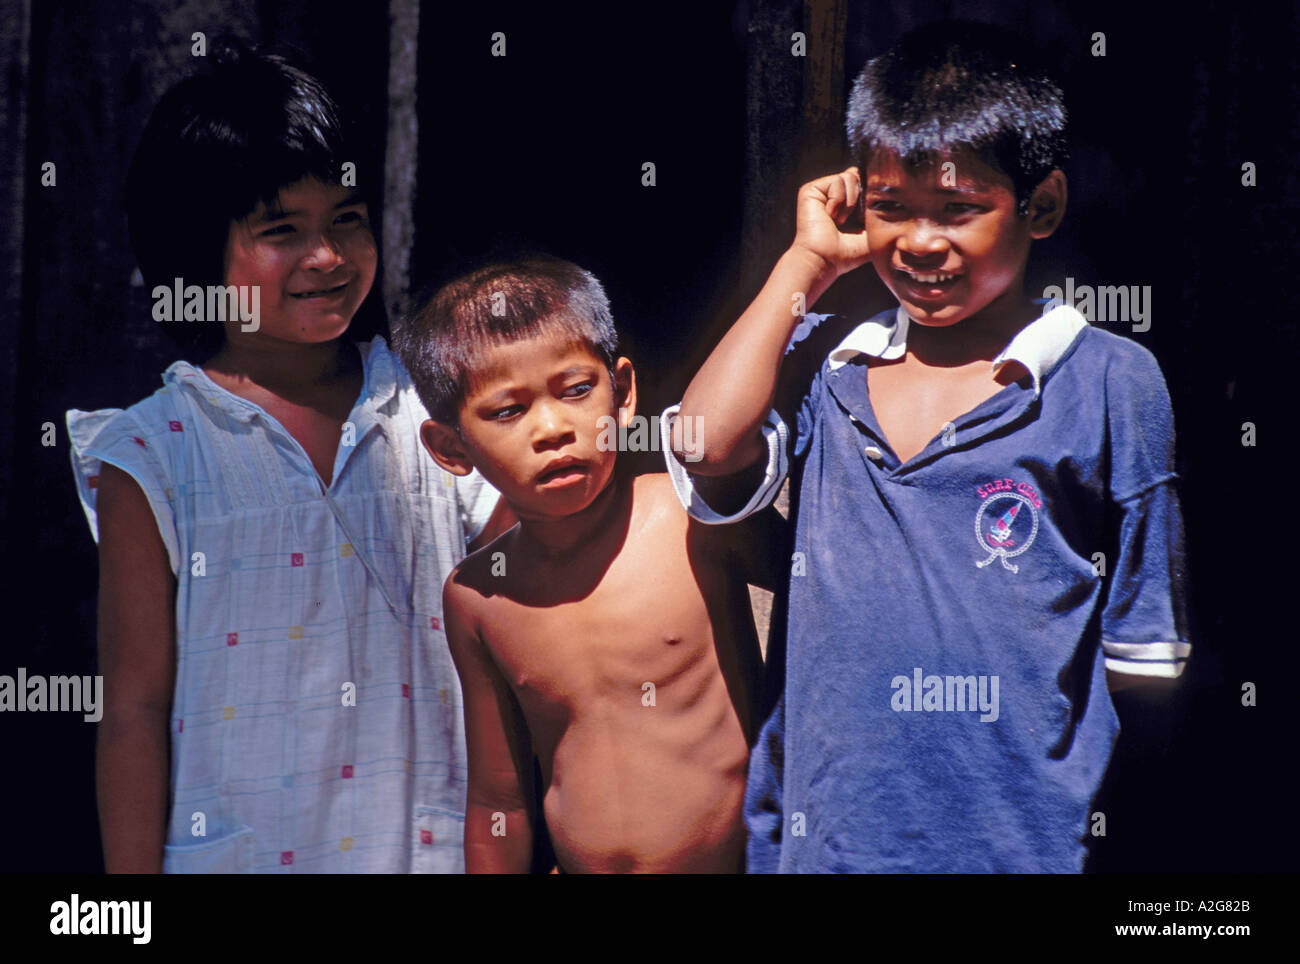 Street kids who are pickpockets in Thailand Stock Photo